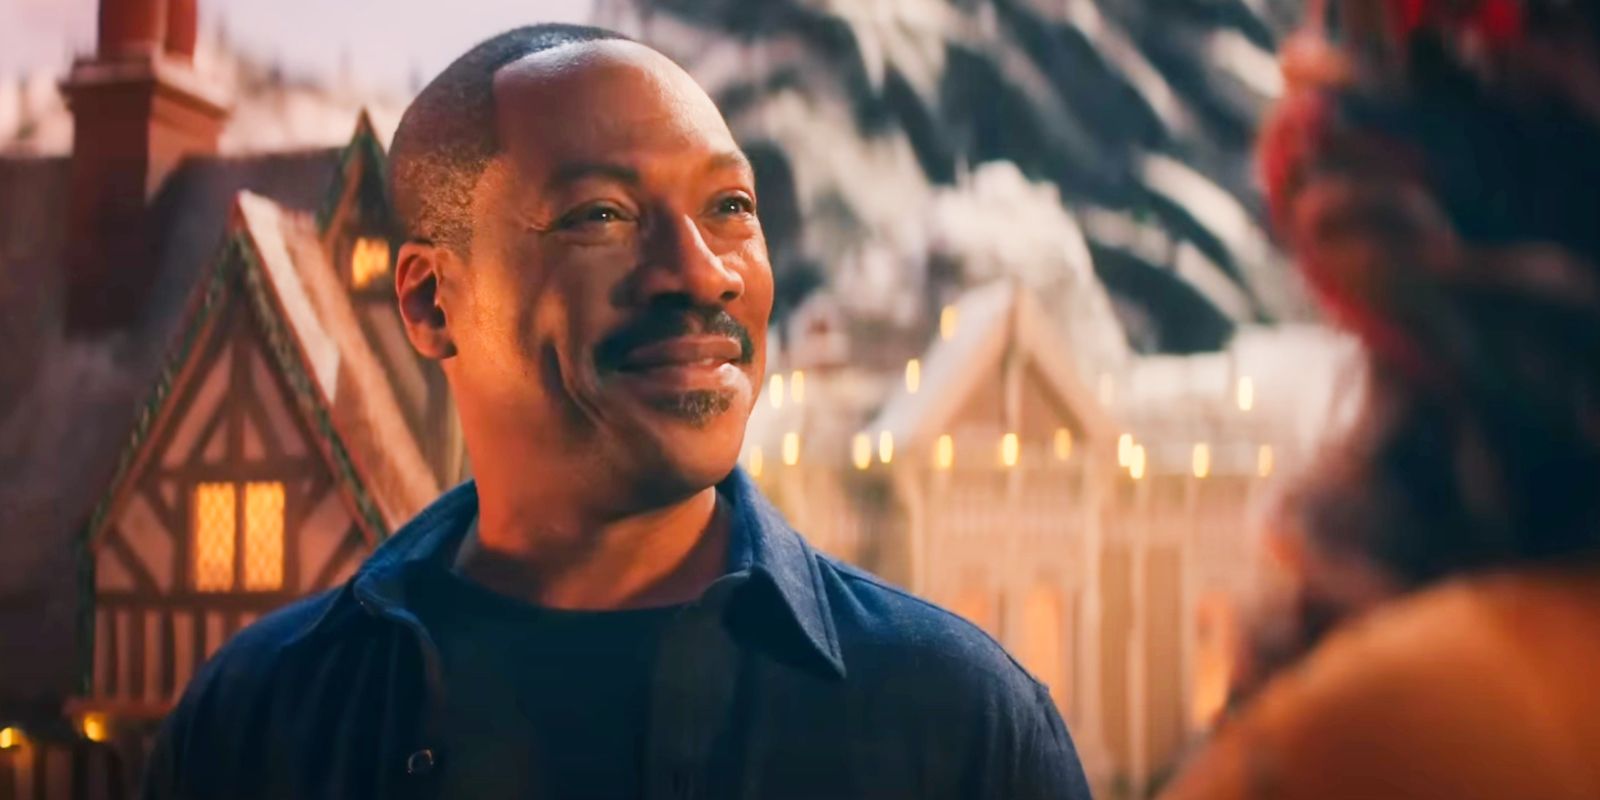 Eddie Murphy as Chris Carver smiling among Christmas decorations in Candy Cane Lane